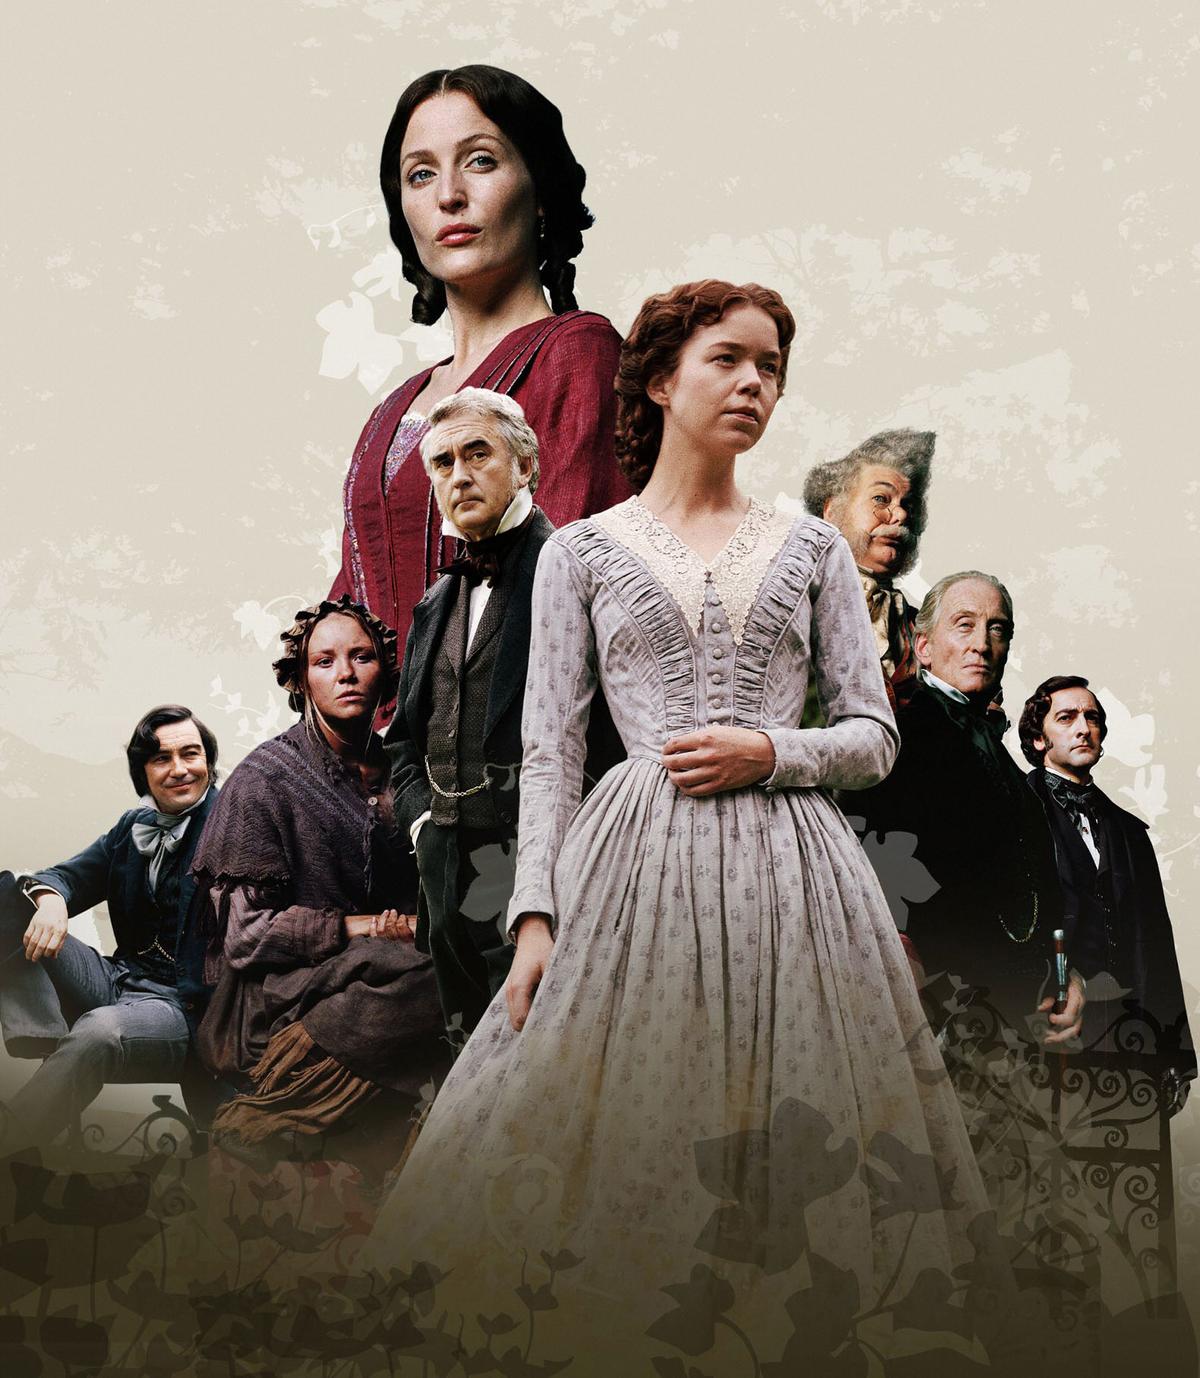 The BBC's "Bleak House" adapted Charles Dickens's novel over 15 episodes. (MovieStillsDB)